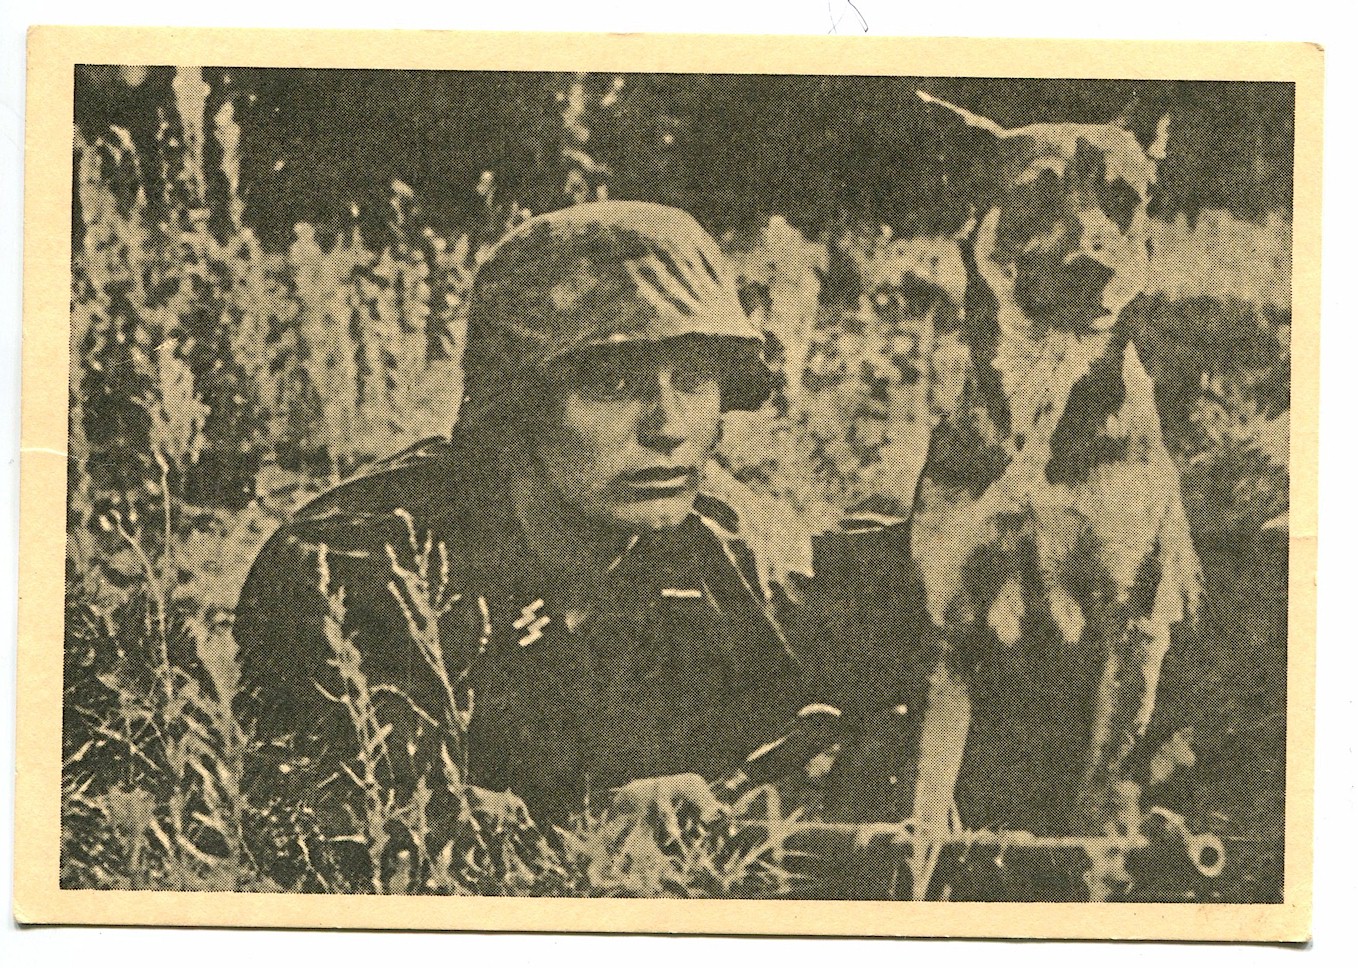 UNSERE WAFFEN SS POST CARD "THE MESSENGER AND HIS DOG"